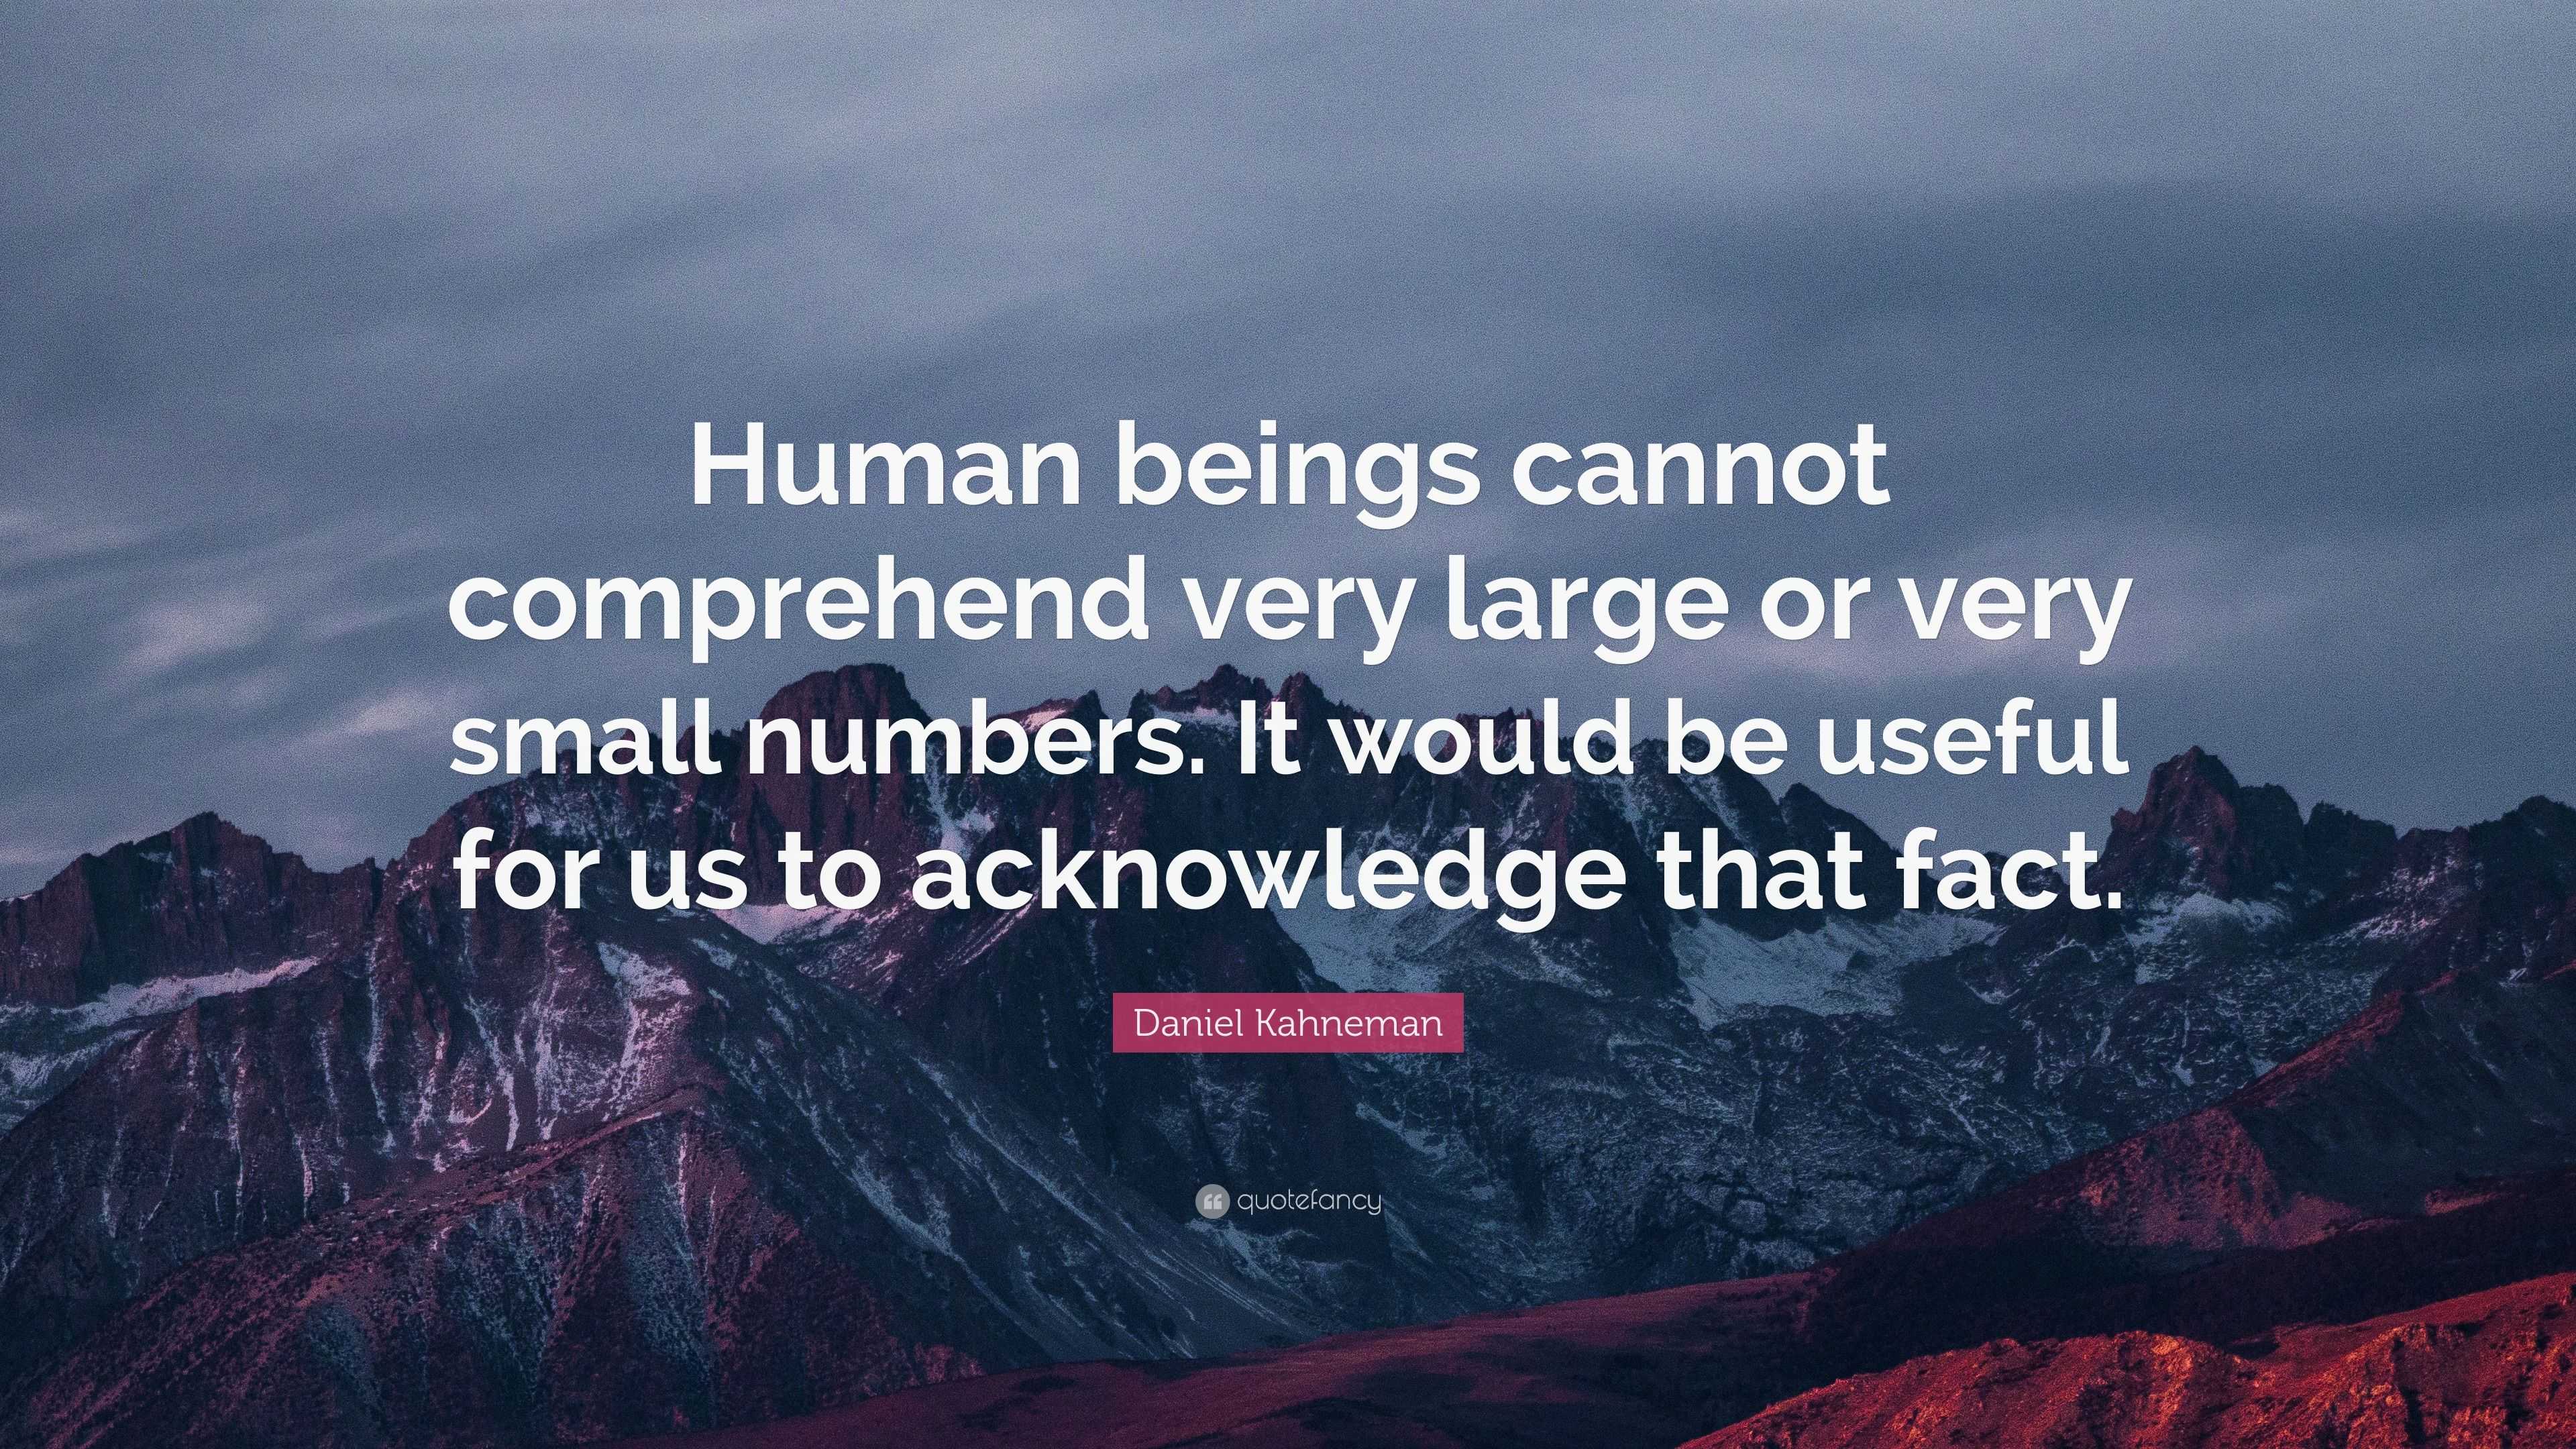 Daniel Kahneman Quote: “Human beings cannot comprehend very large or ...